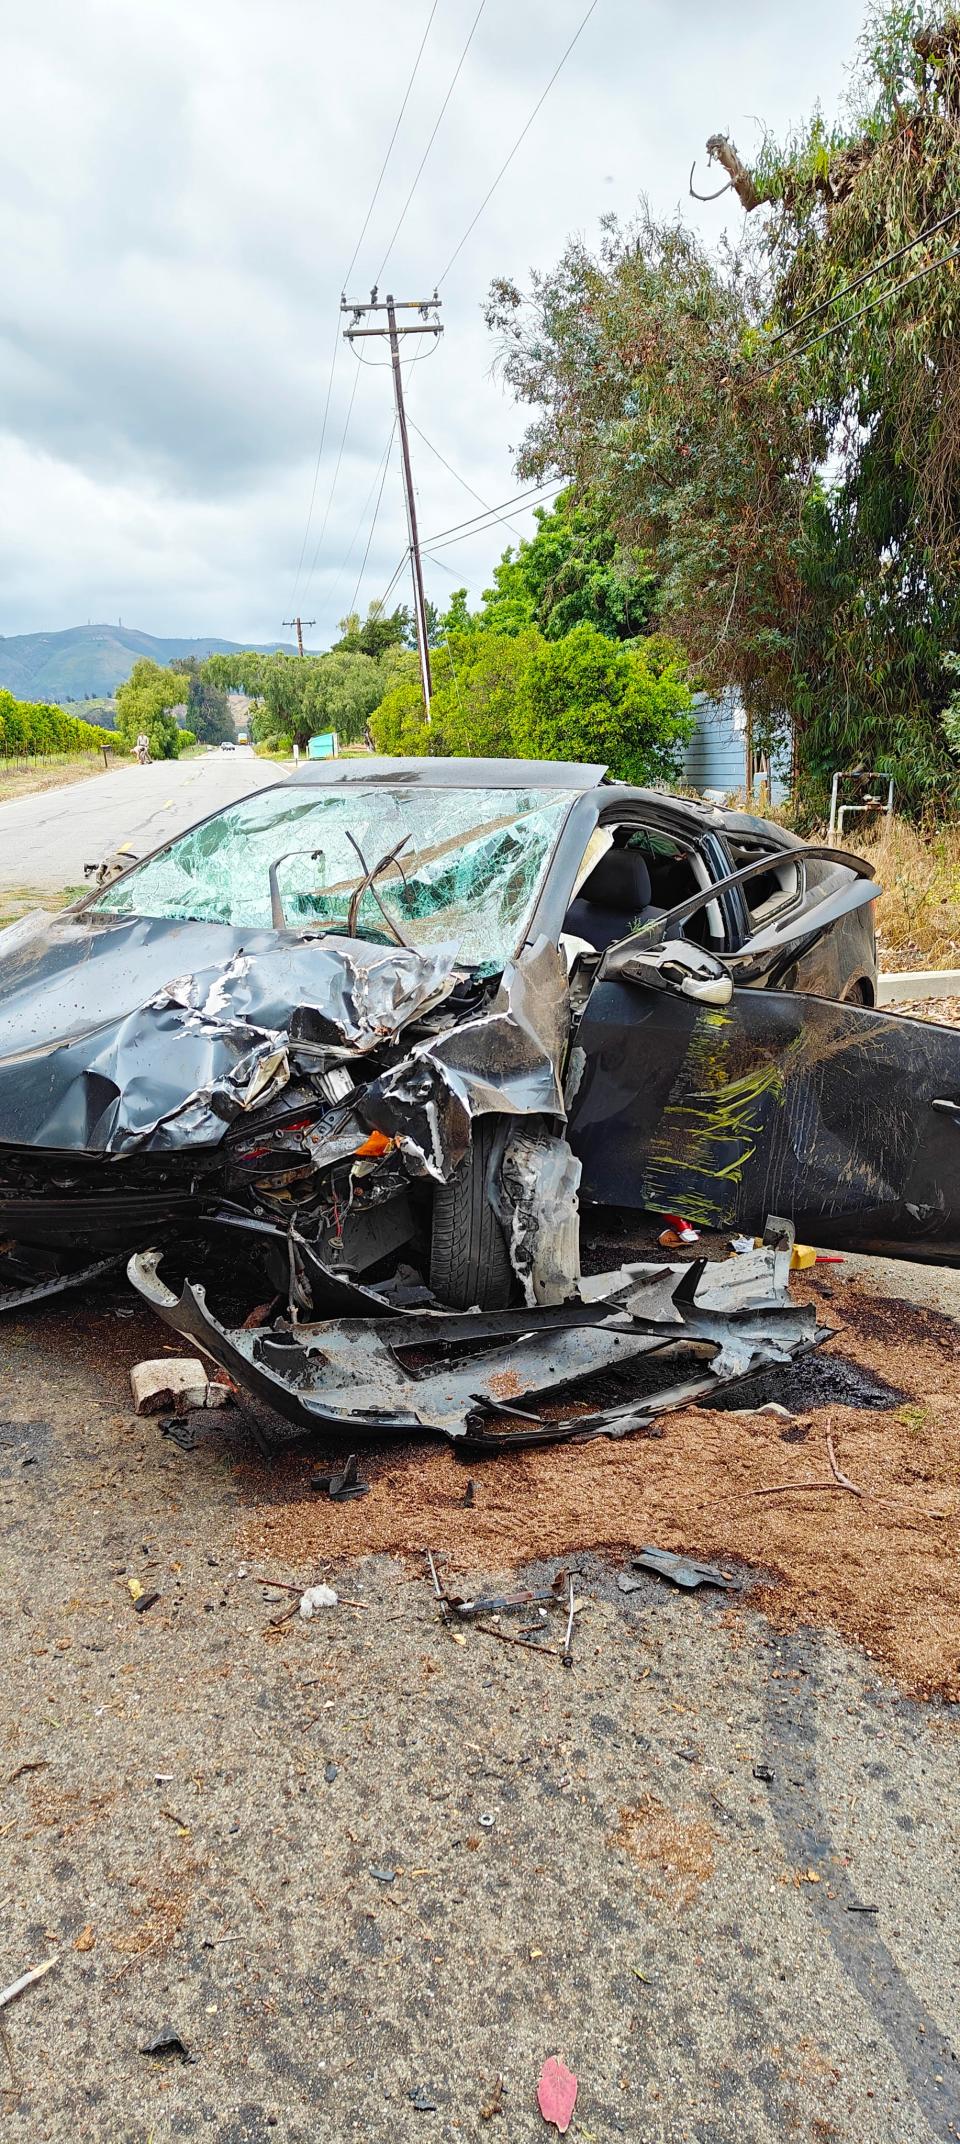 The driver of a Scion was flown to the hospital with major injuries after a single-vehicle crash in the Somis area Monday afternoon.